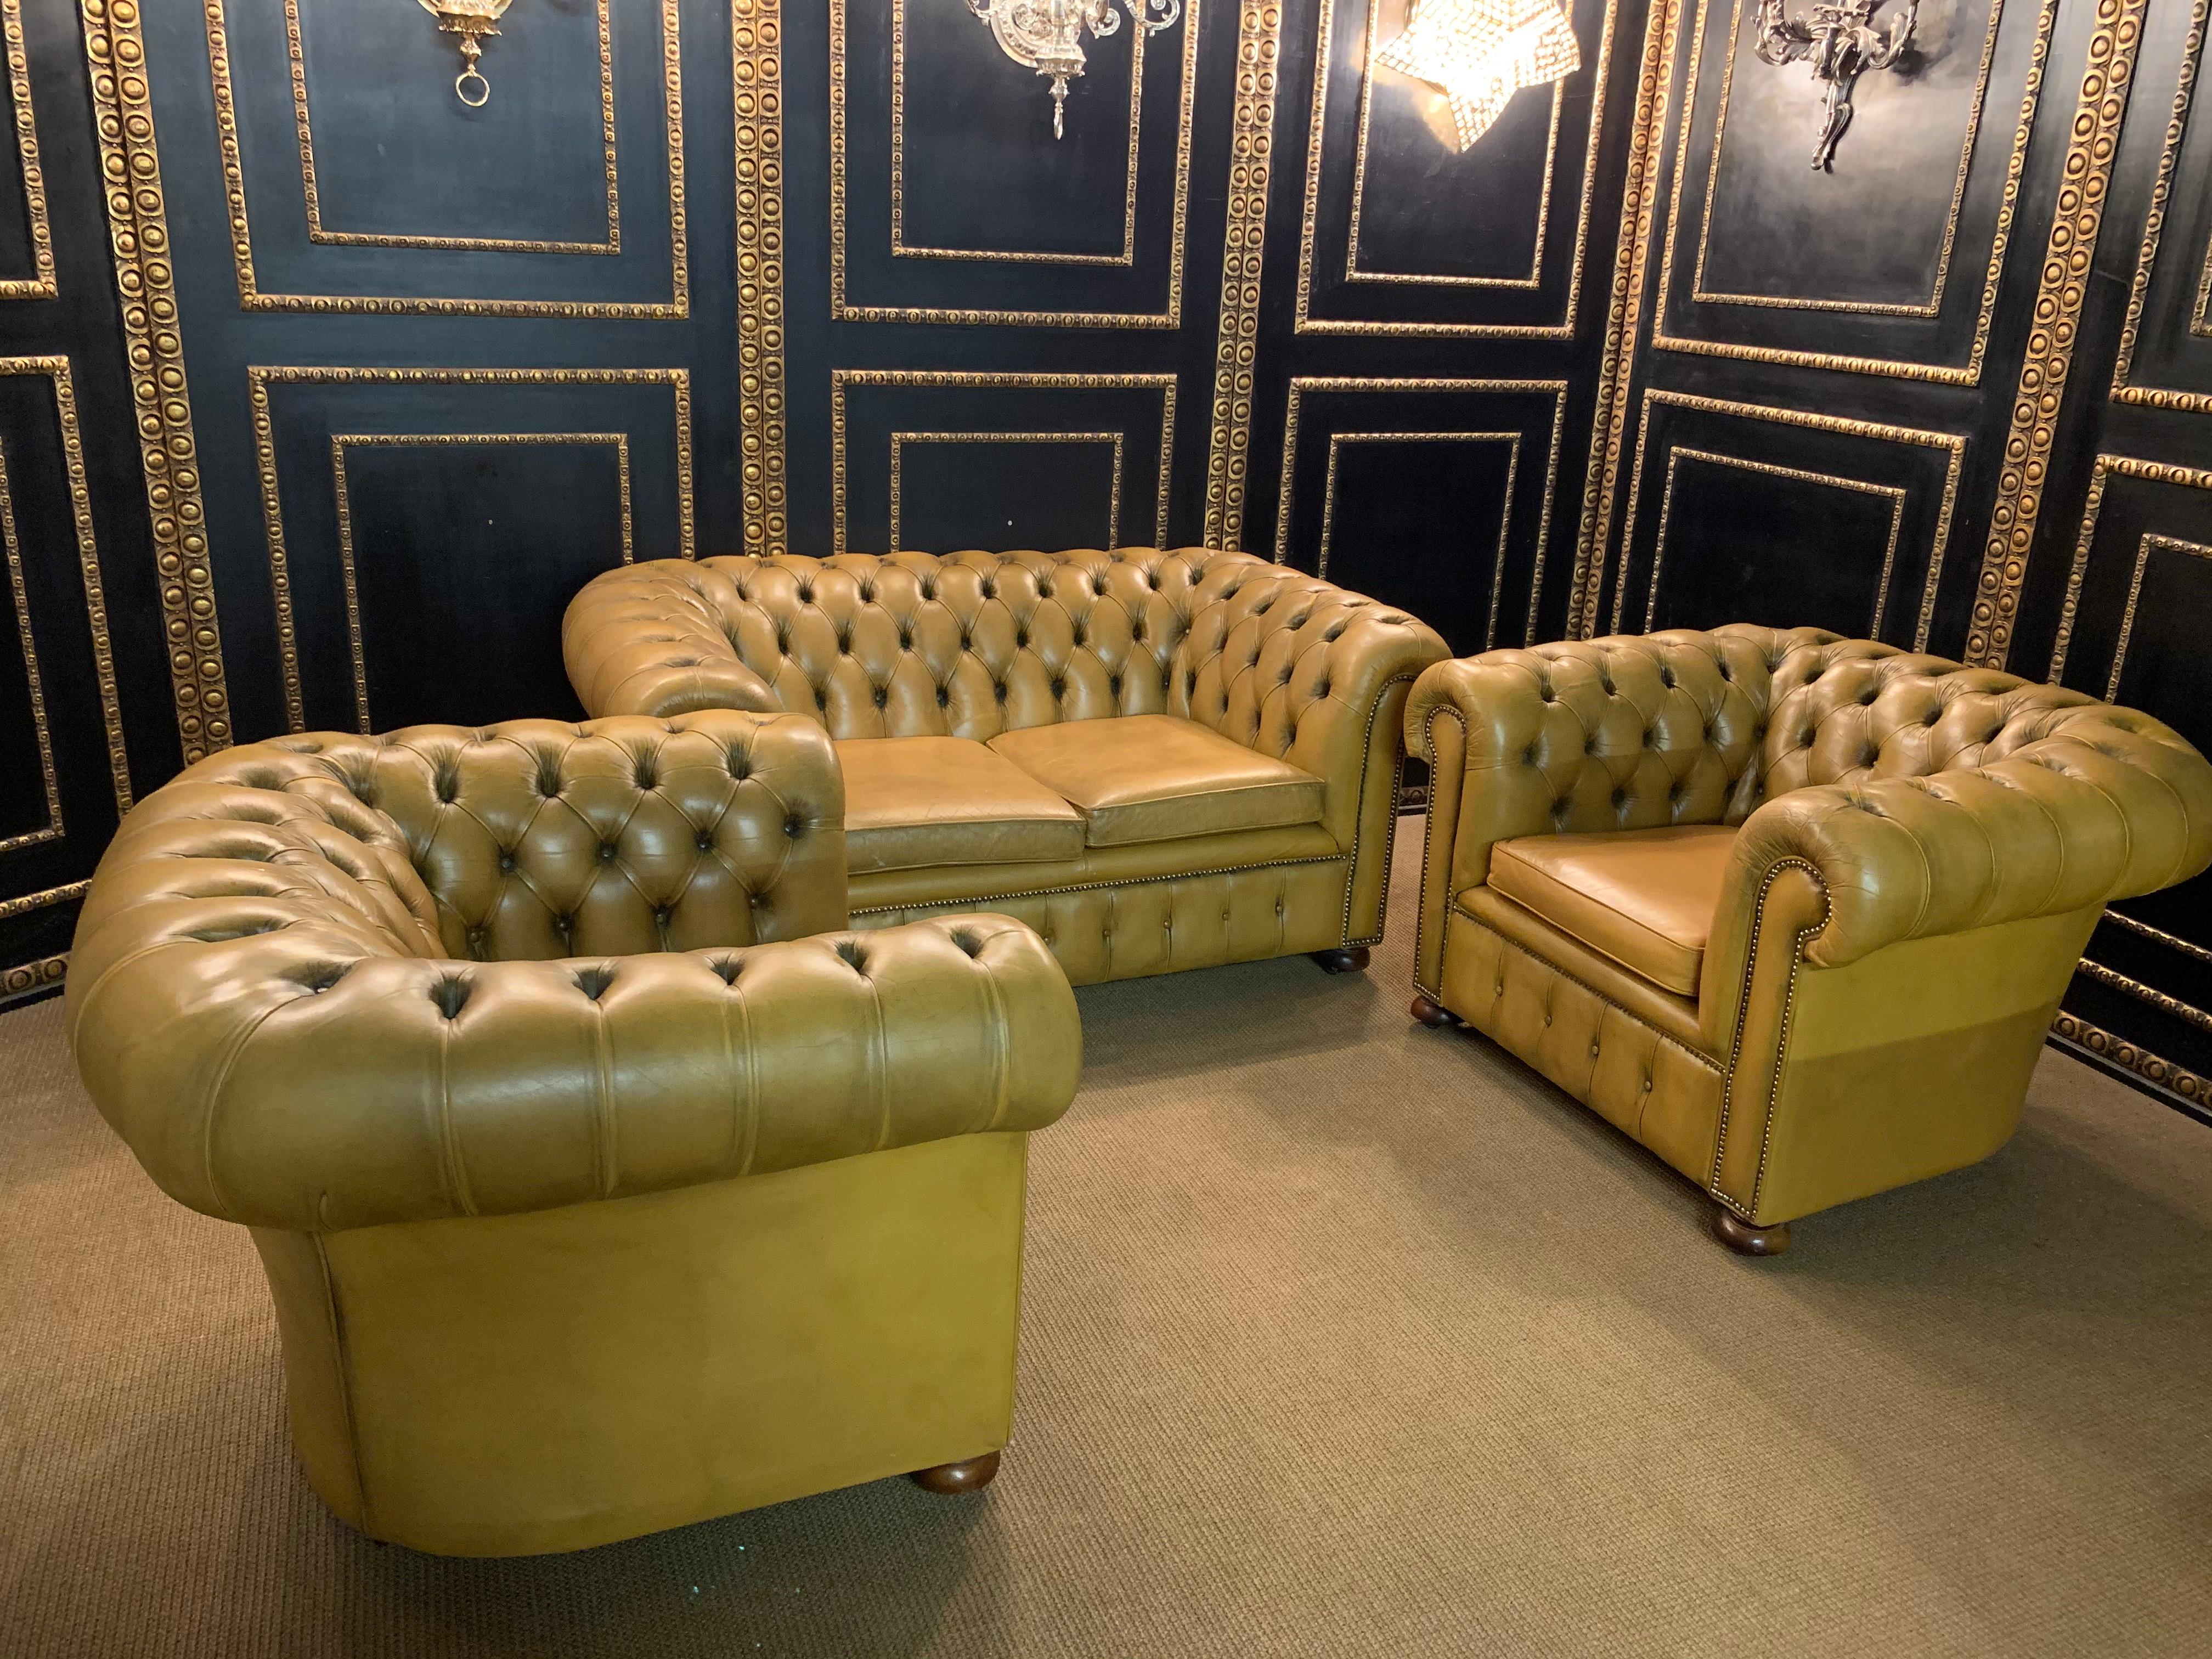 We are delighted to offer this stunning very rare handmade in England mustard yellow leather sofa and armchairs. Where to begin! This suite is absolute eye candy from every angle, it has the original leather hide, it has been hand dyed this lovely